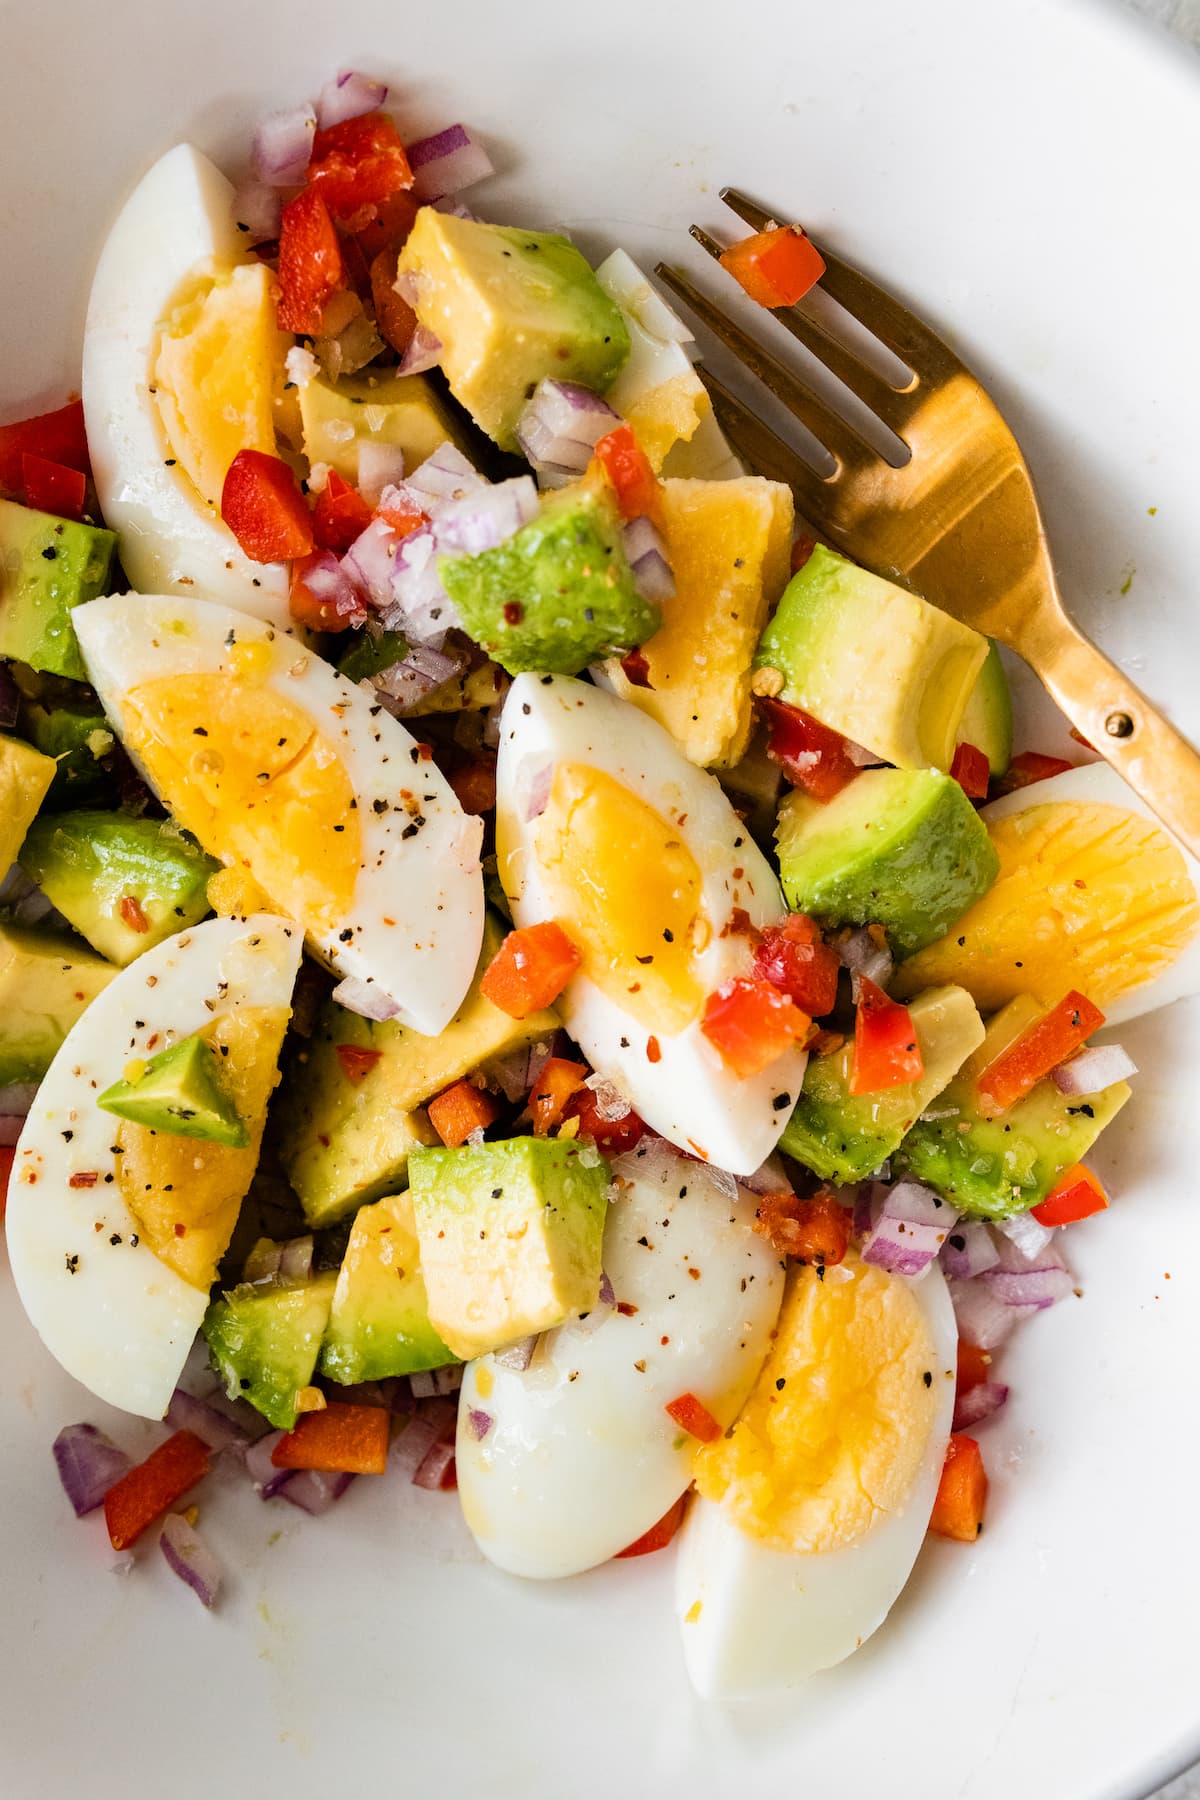 A white bowl with a golden fork containing hard boiled eggs, avocado, red onion, red bell pepper, and topped with spices.